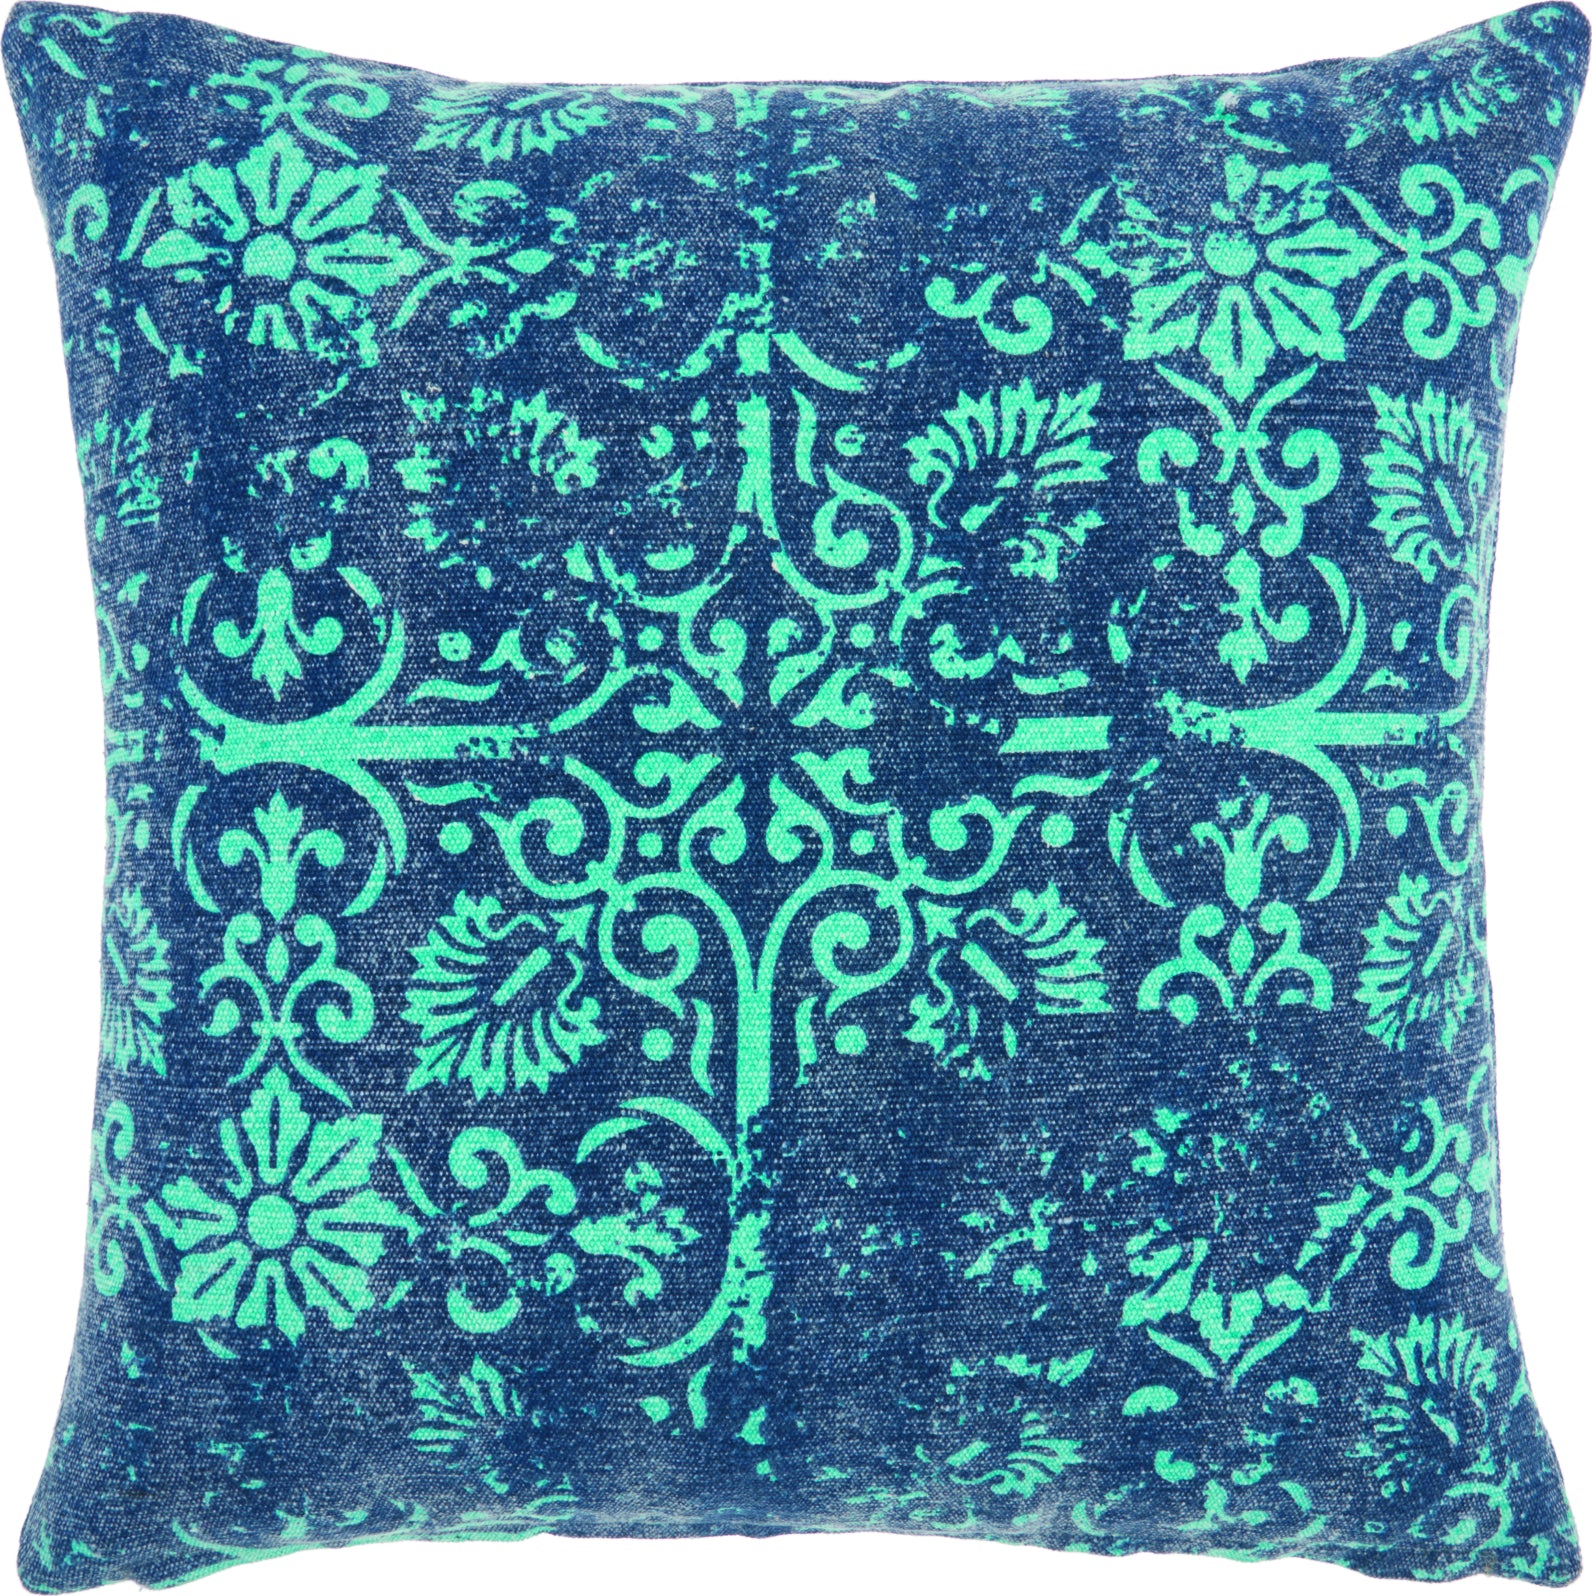 Nourison Life Styles Distress Damask Teal by Mina Victory main image